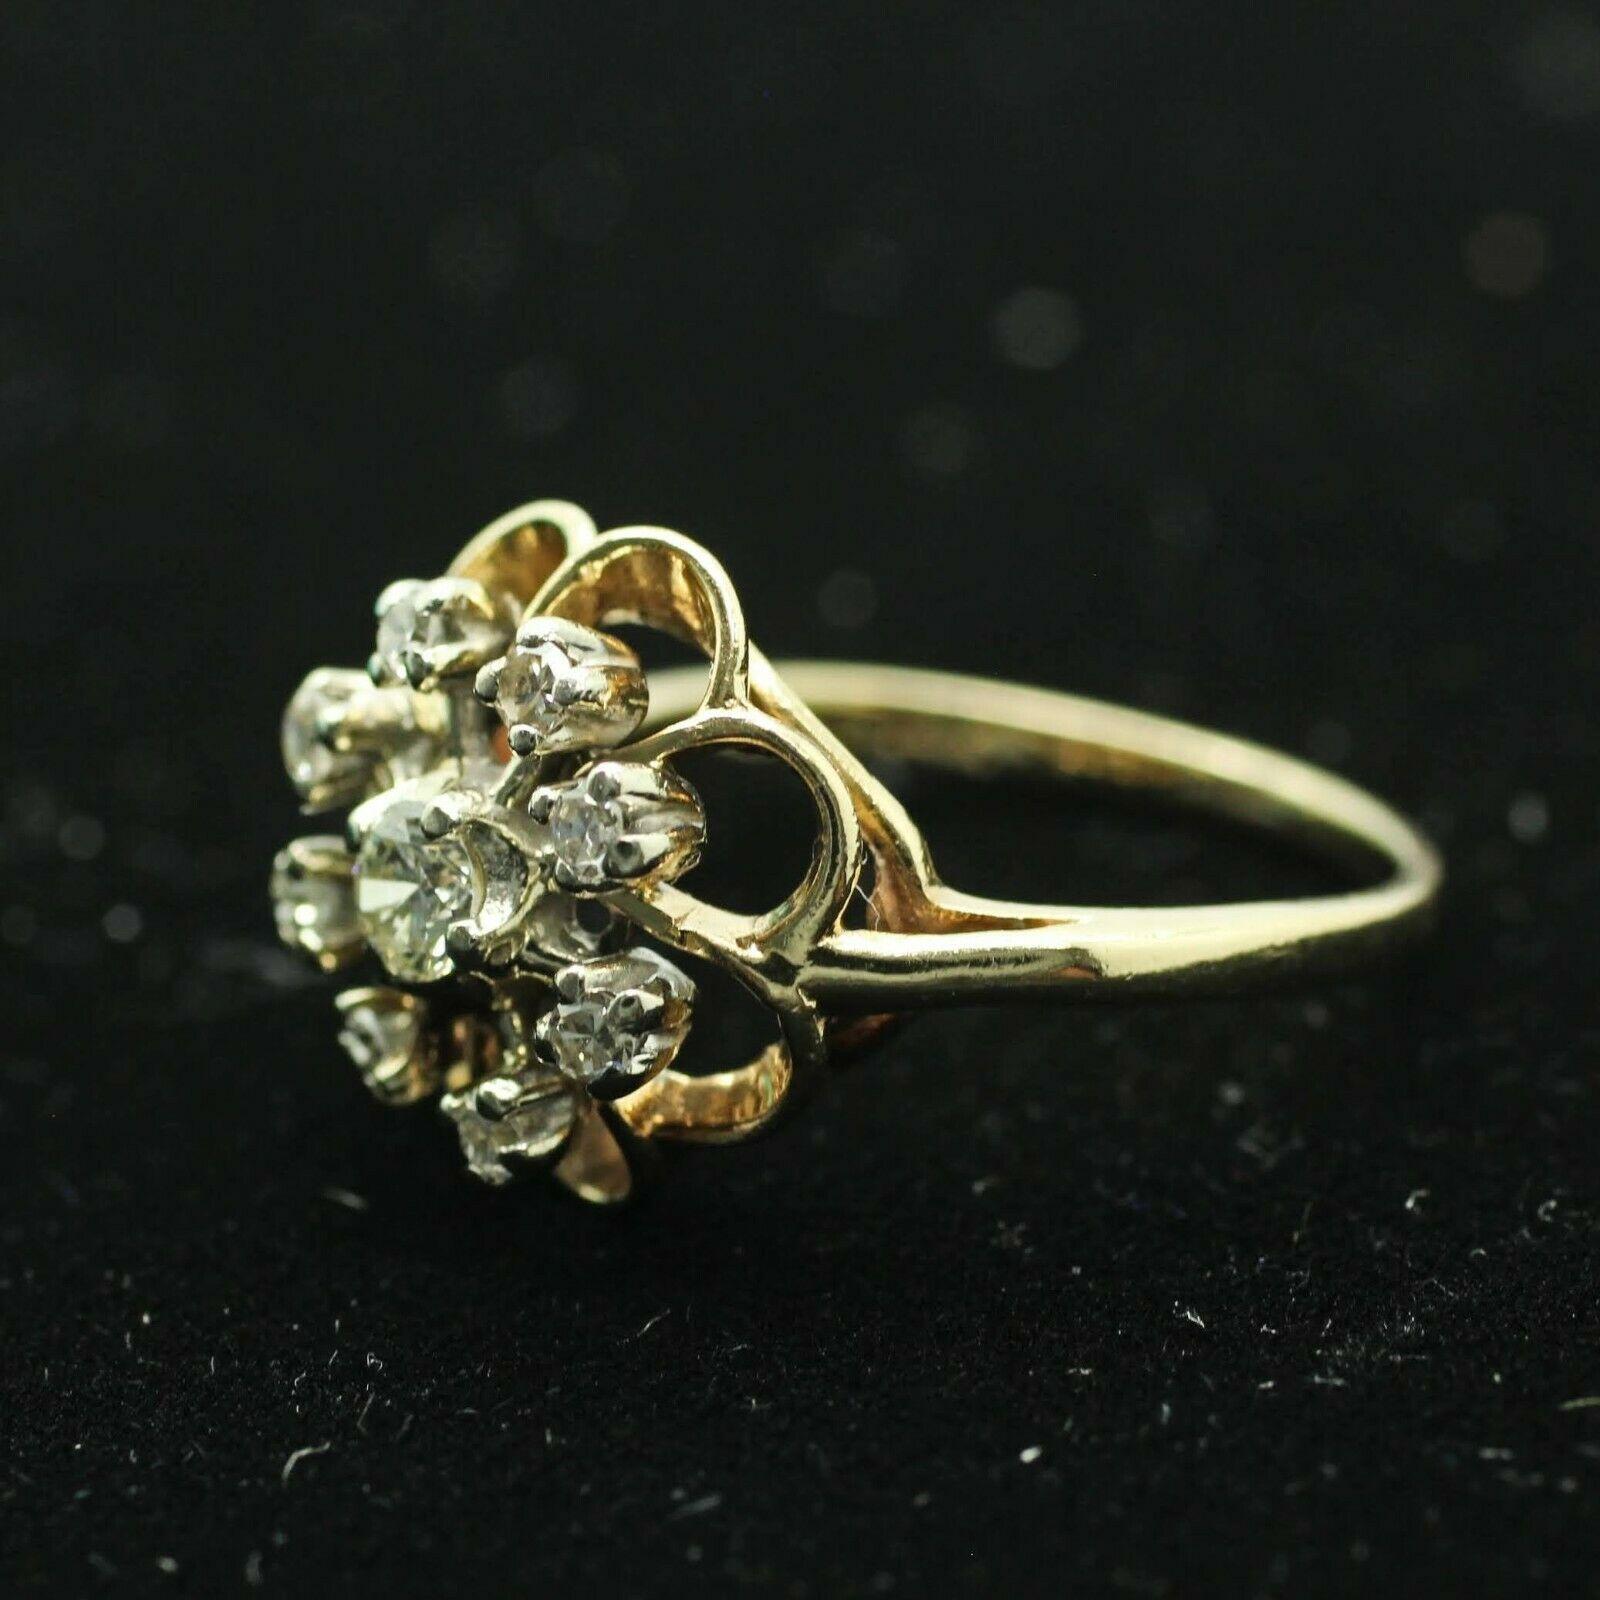  
Specifications:
    DIAMONDS: 9 PCS ROUND CUT APPROX 0.25CTW
    type: COCKTAIL RING WITH DIAMONDS
    metal: 14K YELLOW GOLD
    SIZE: 6.75US
    WIDTH/THICK: 13.68-2.06MM-1.08MM
    WEIGHT: 3.6RS
